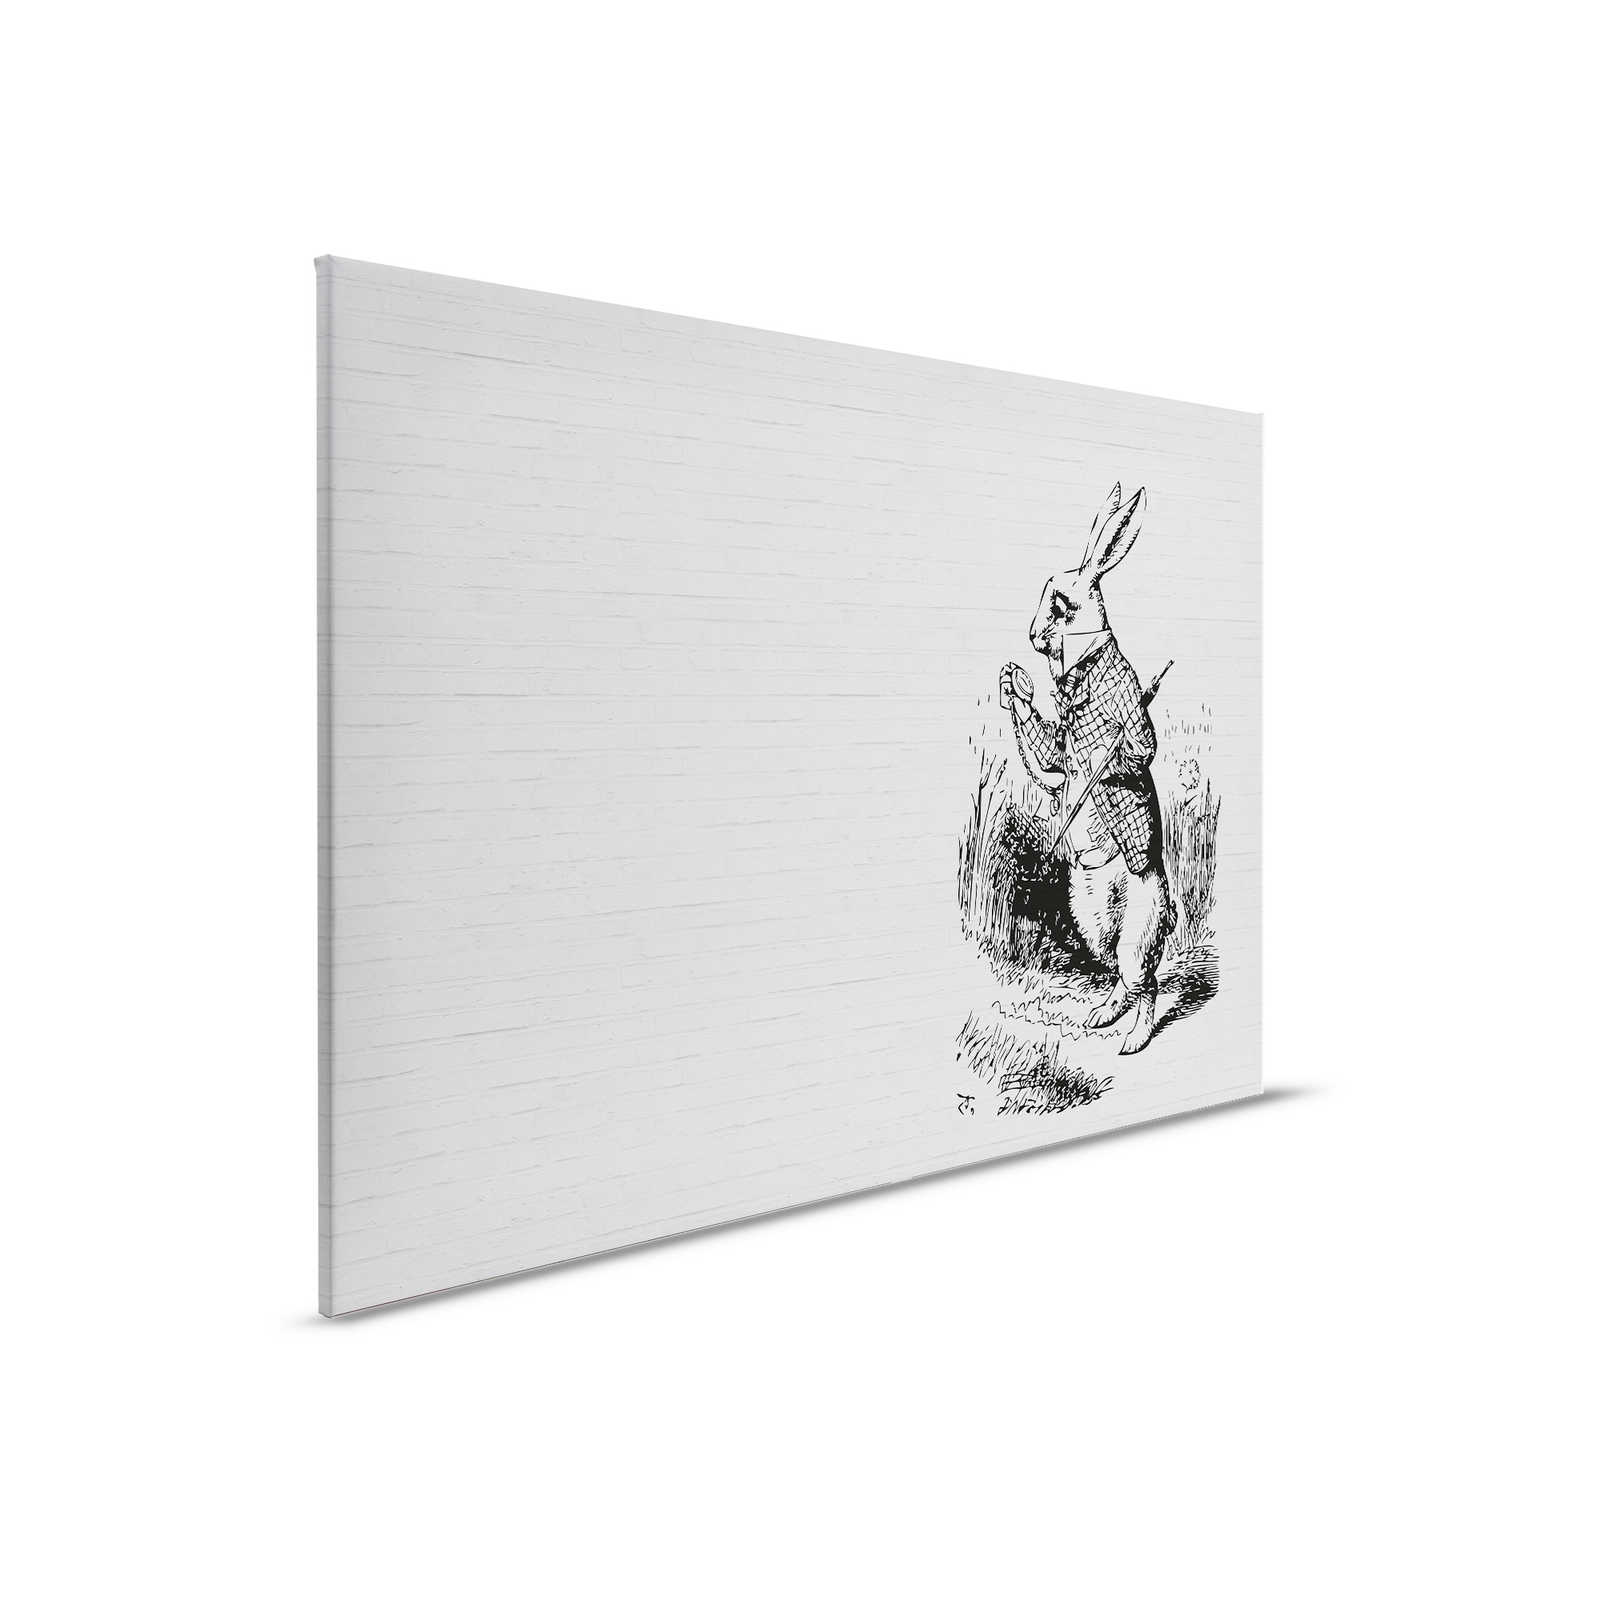 Black & White Canvas Painting Stone Look & Rabbit with Walking Stick - 0.90 m x 0.60 m
